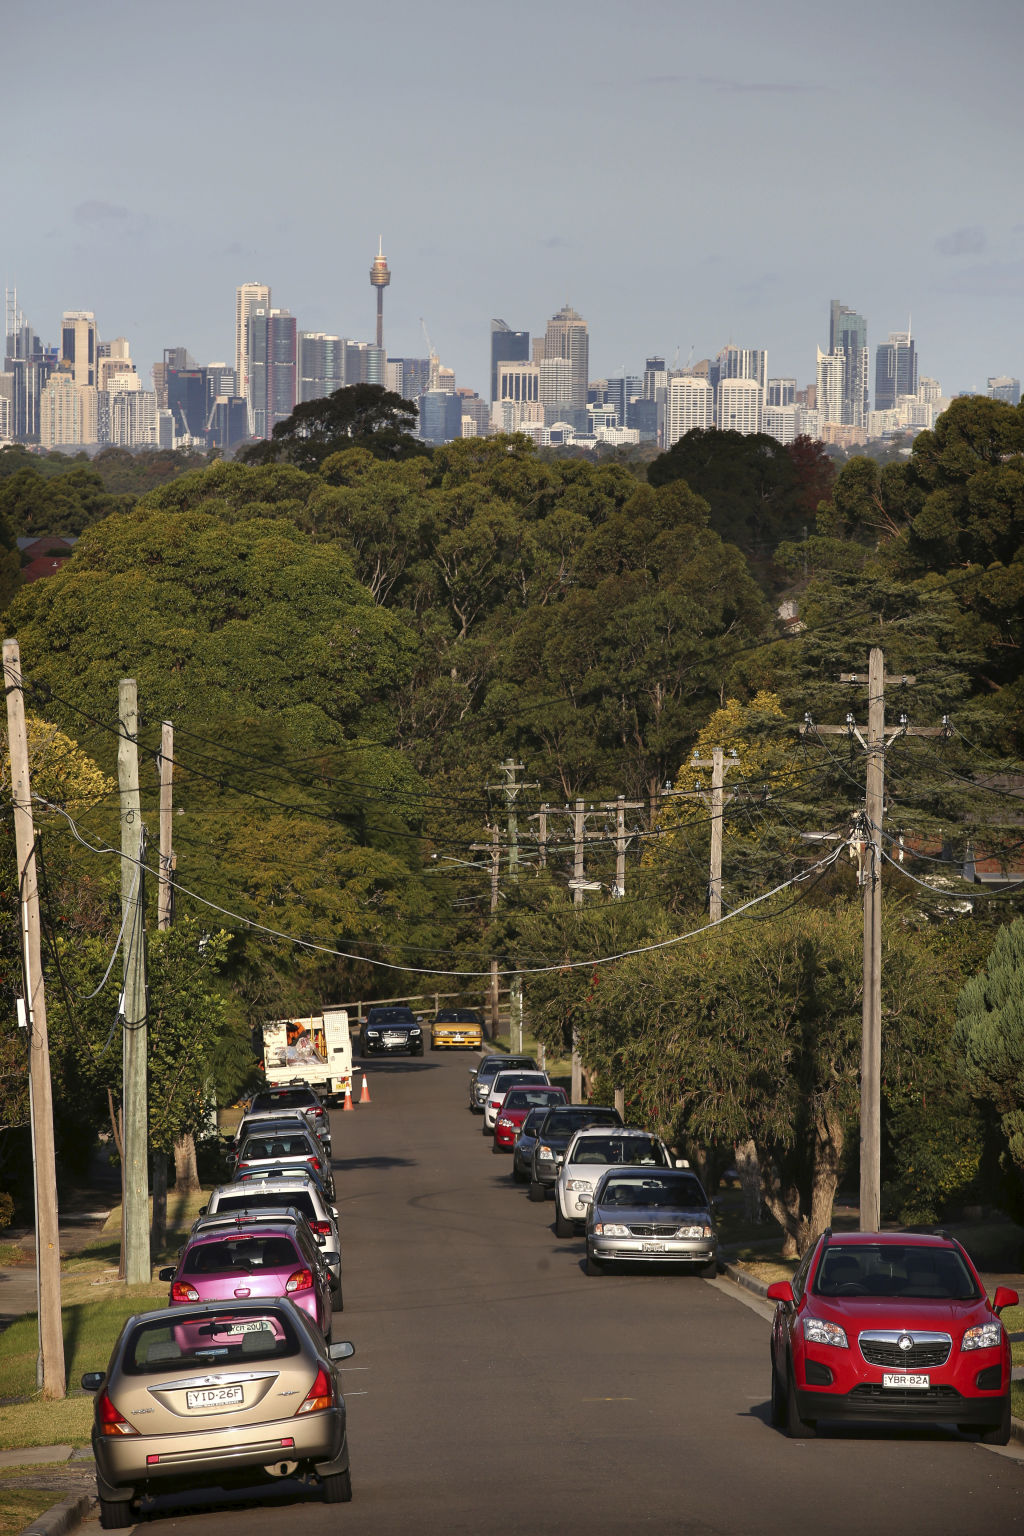 Cher sang 'If I could turn back time' and she was right: rents in some Sydney suburbs are now cheaper than they were five years ago. Photo: James Alcock